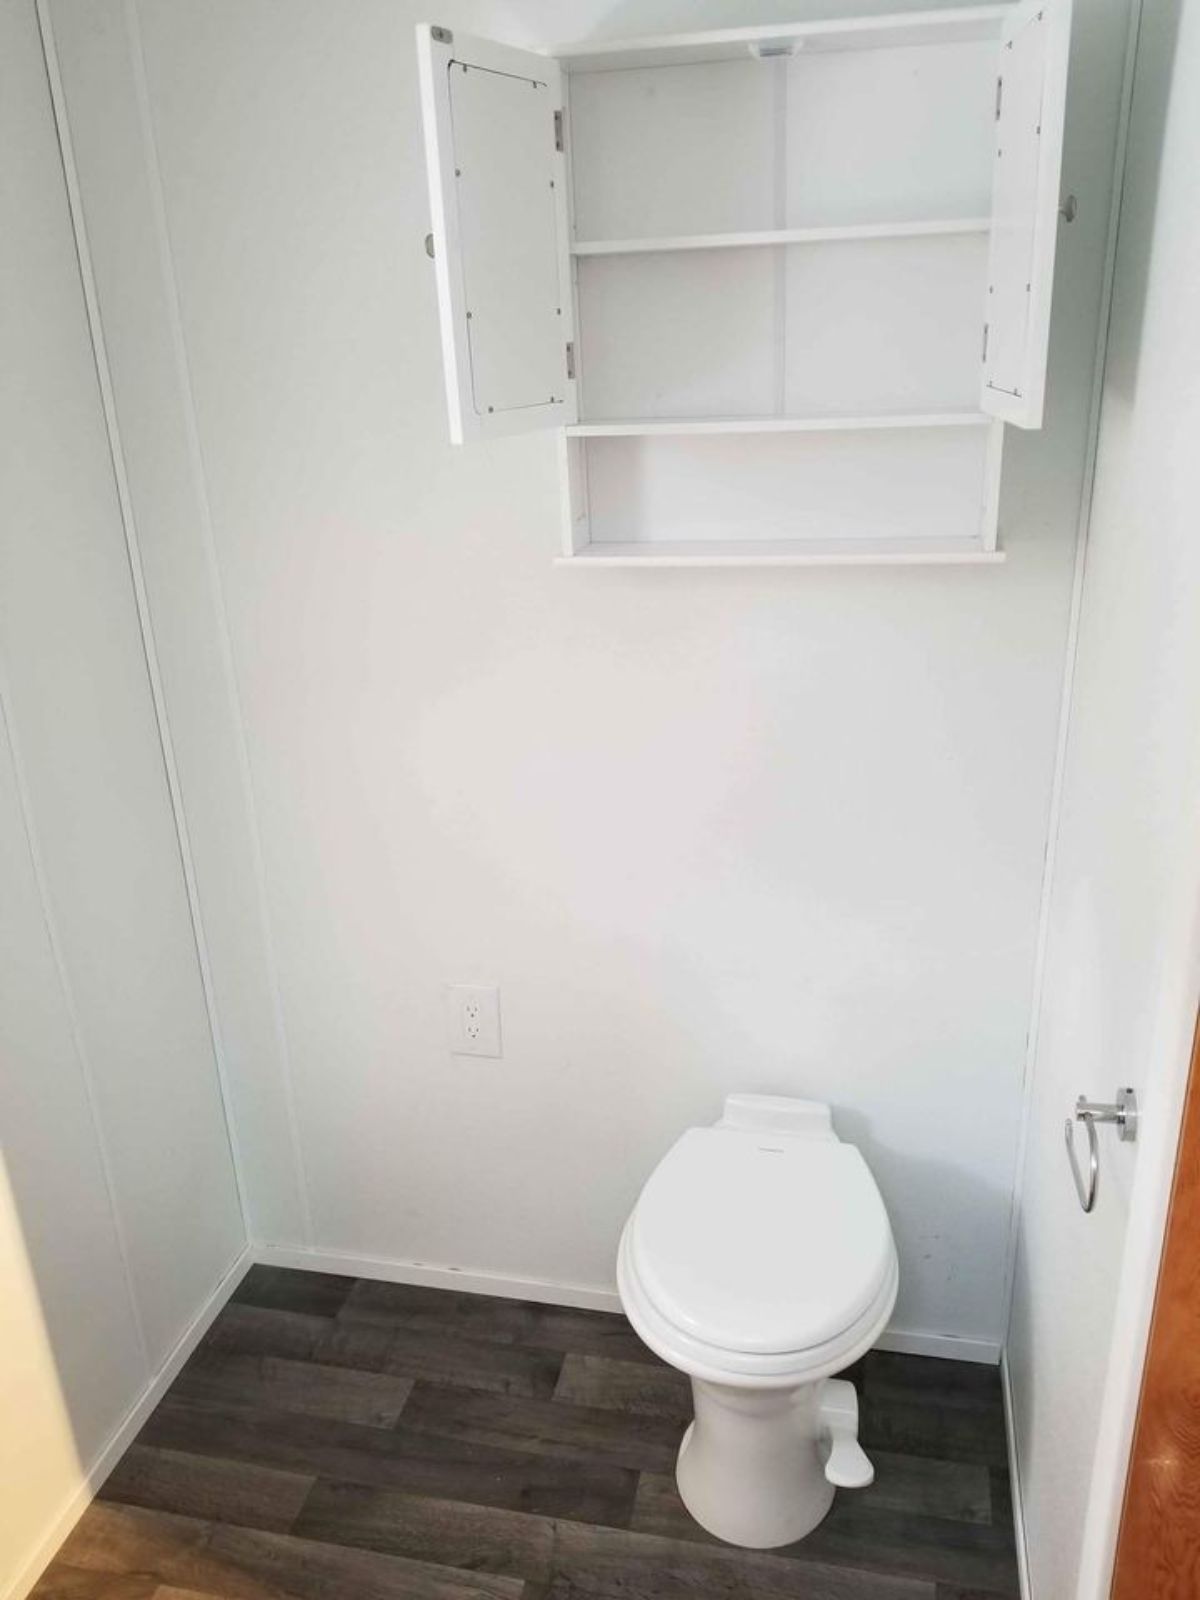 composting toilet in bathroom of tiny home in British Columbia